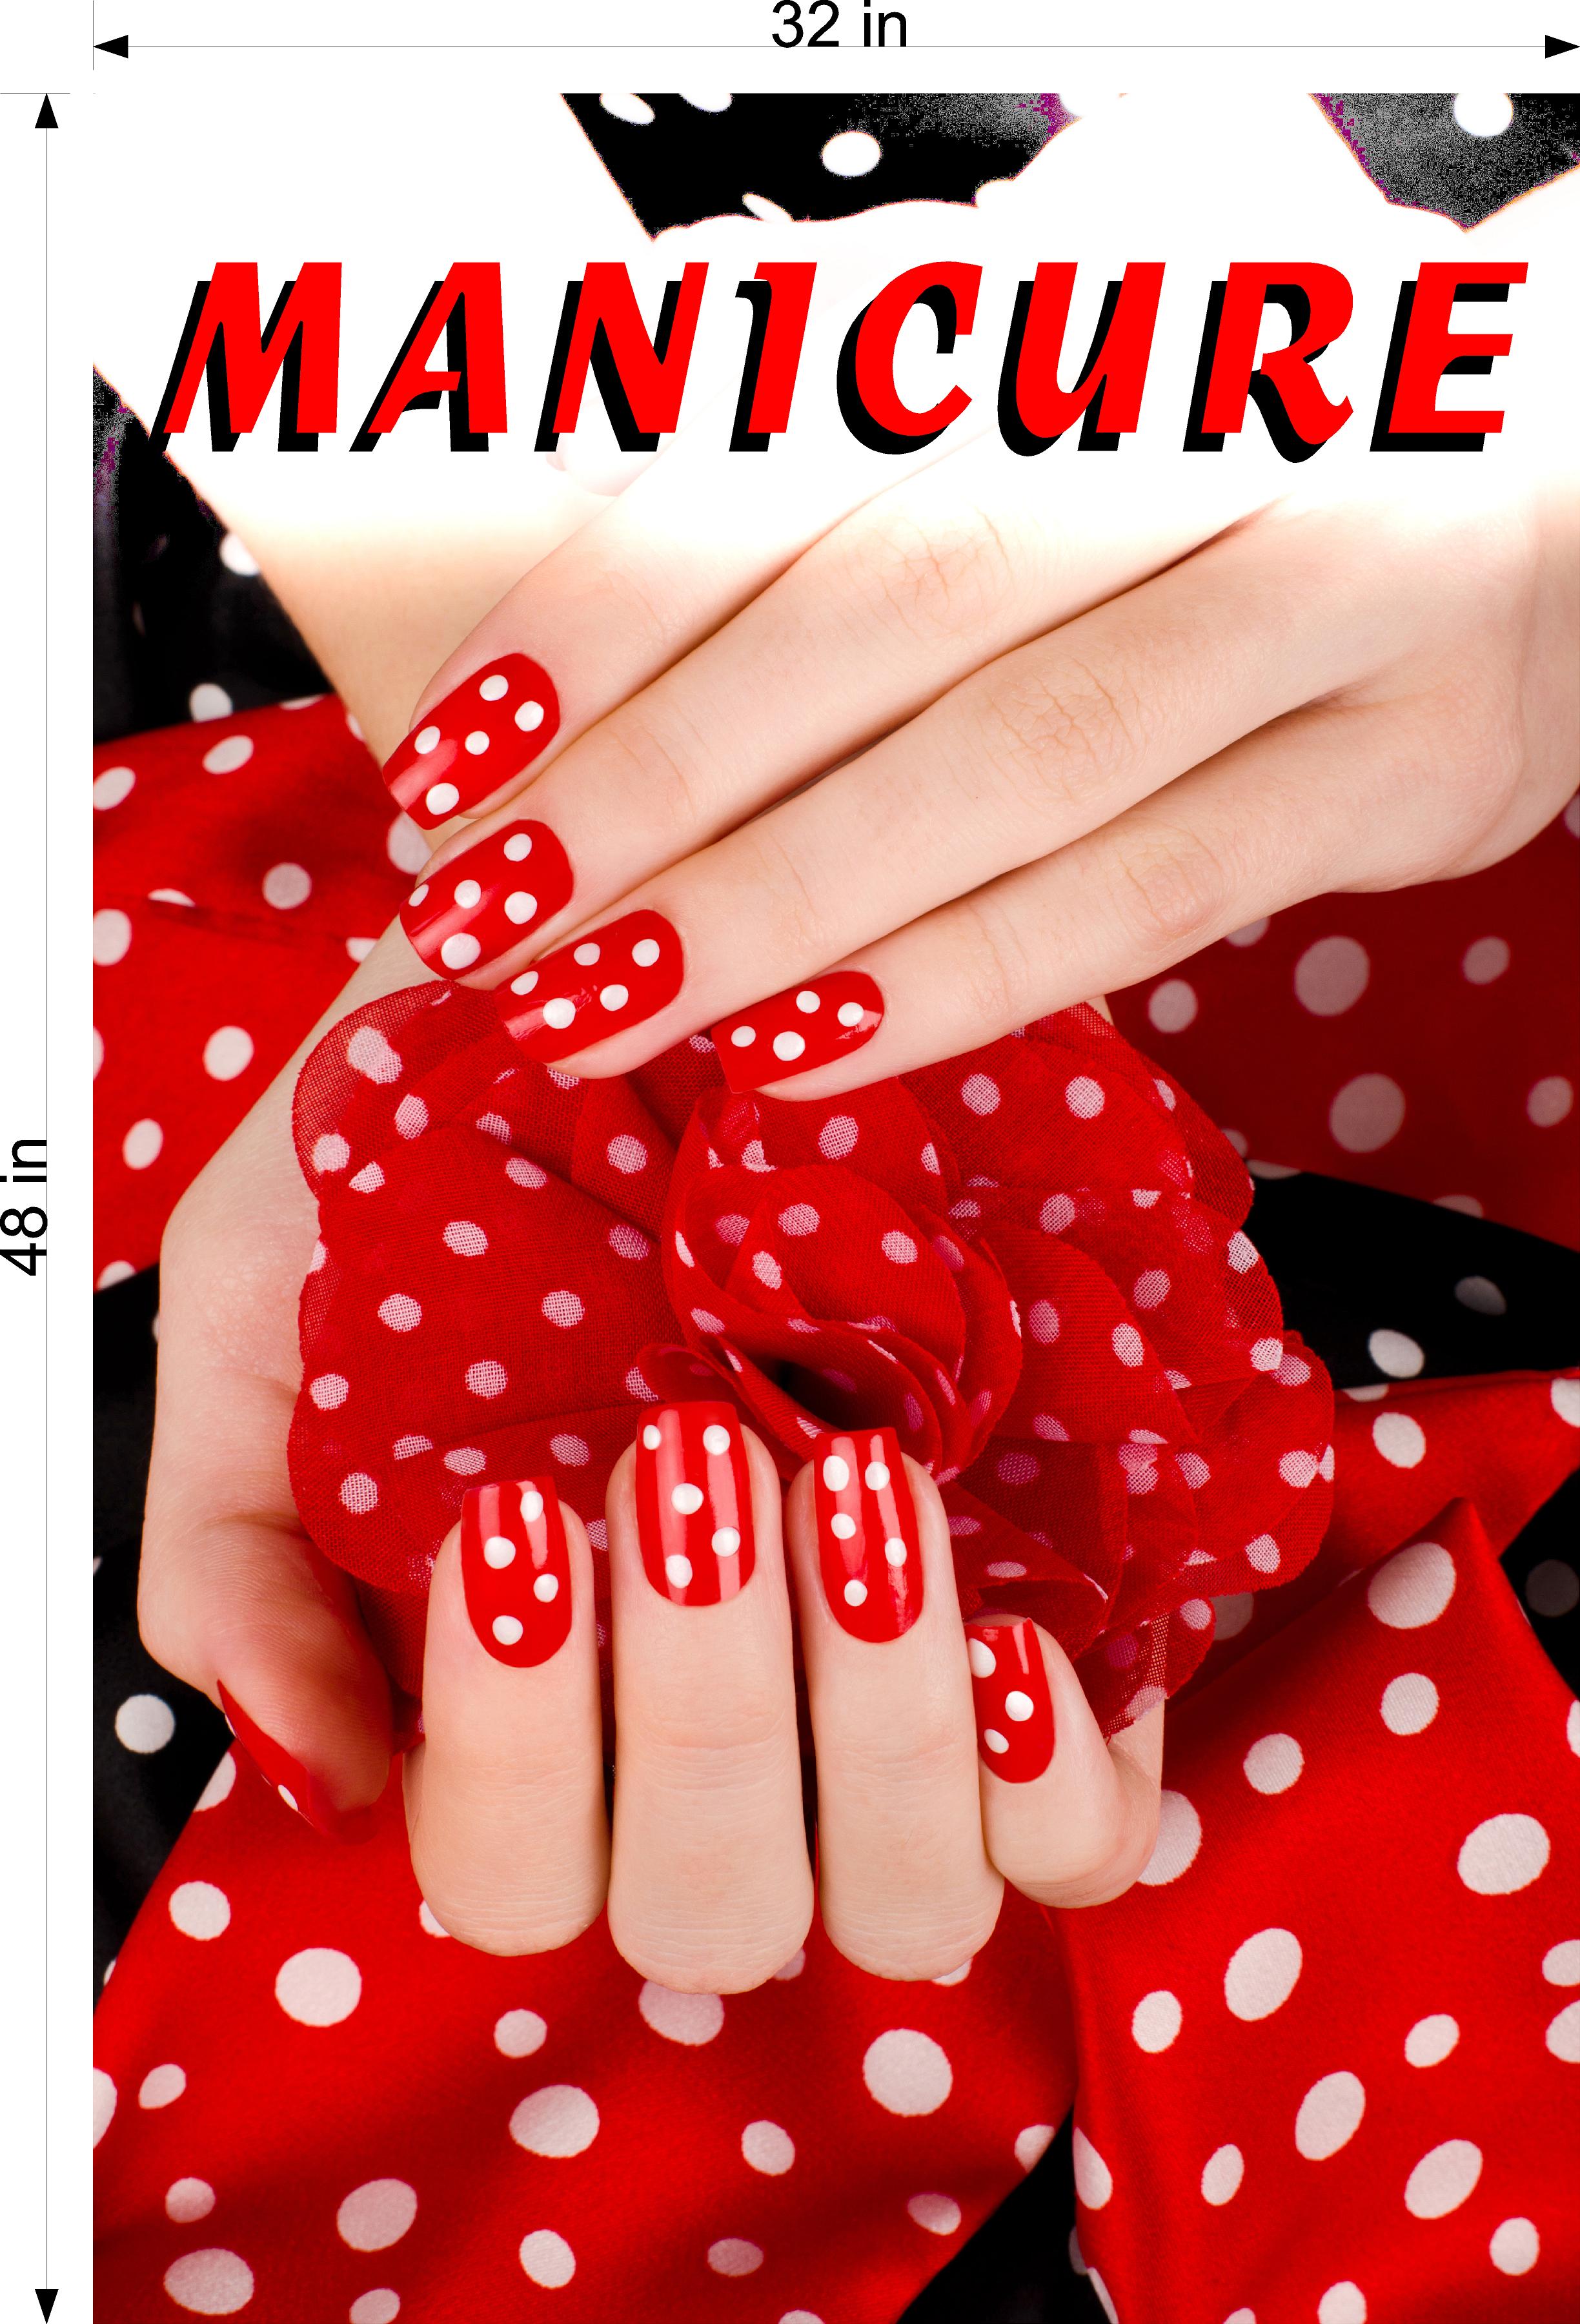 Manicure 15 Photo-Realistic Paper Poster Premium Interior Inside Sign Advertising Marketing Wall Window Non-Laminated Vertical